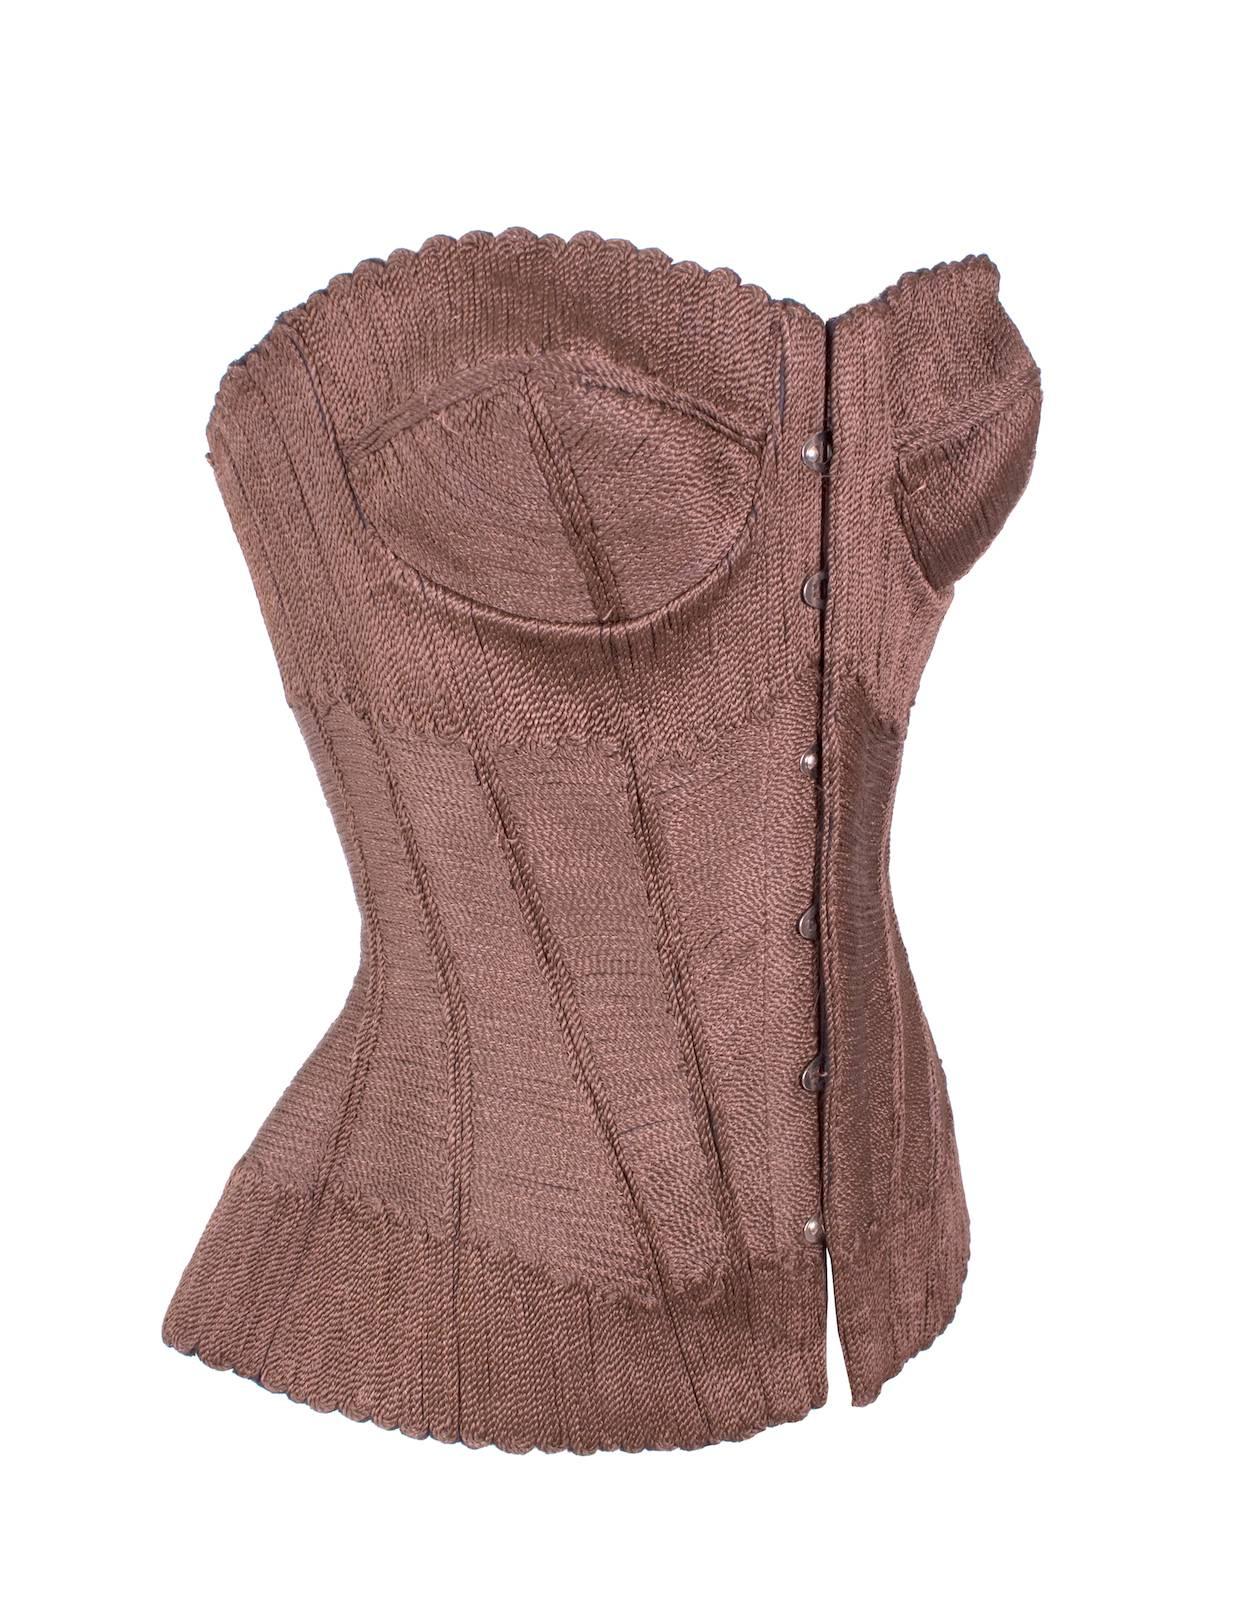 This is a fitted bustier by Jean Paul Gaultier c. 1990s.  It is covered in brown braided threads to give it a woven texture.  It has latch clasp closures in the front and shoestring lace up in the back.  Lined in black silk satin.